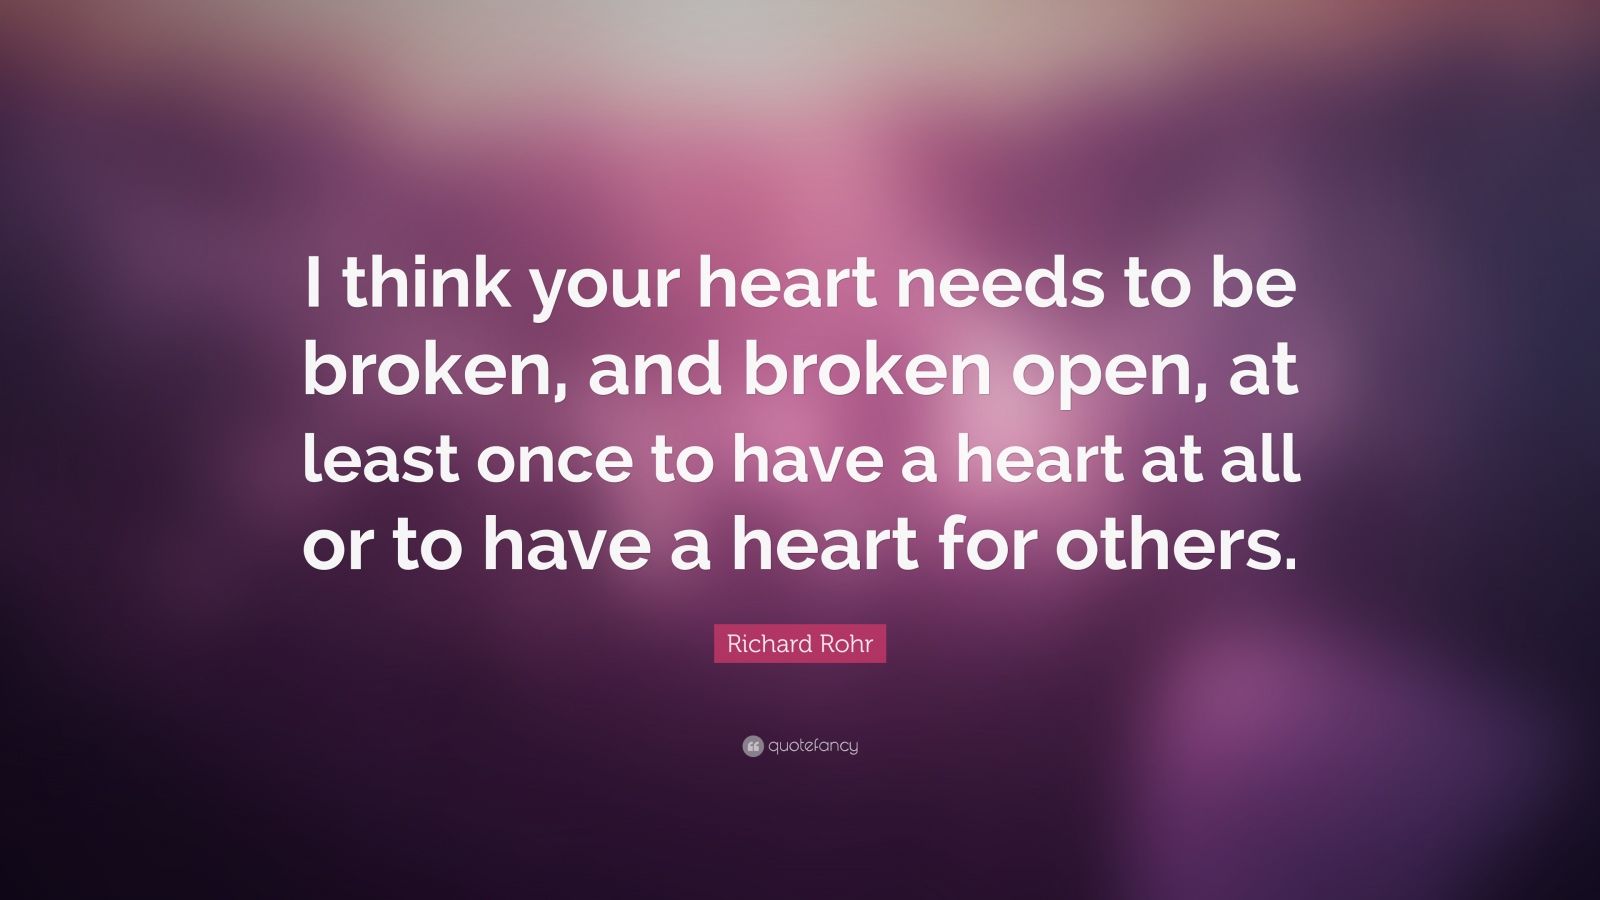 Richard Rohr Quote: “I think your heart needs to be broken, and broken ...